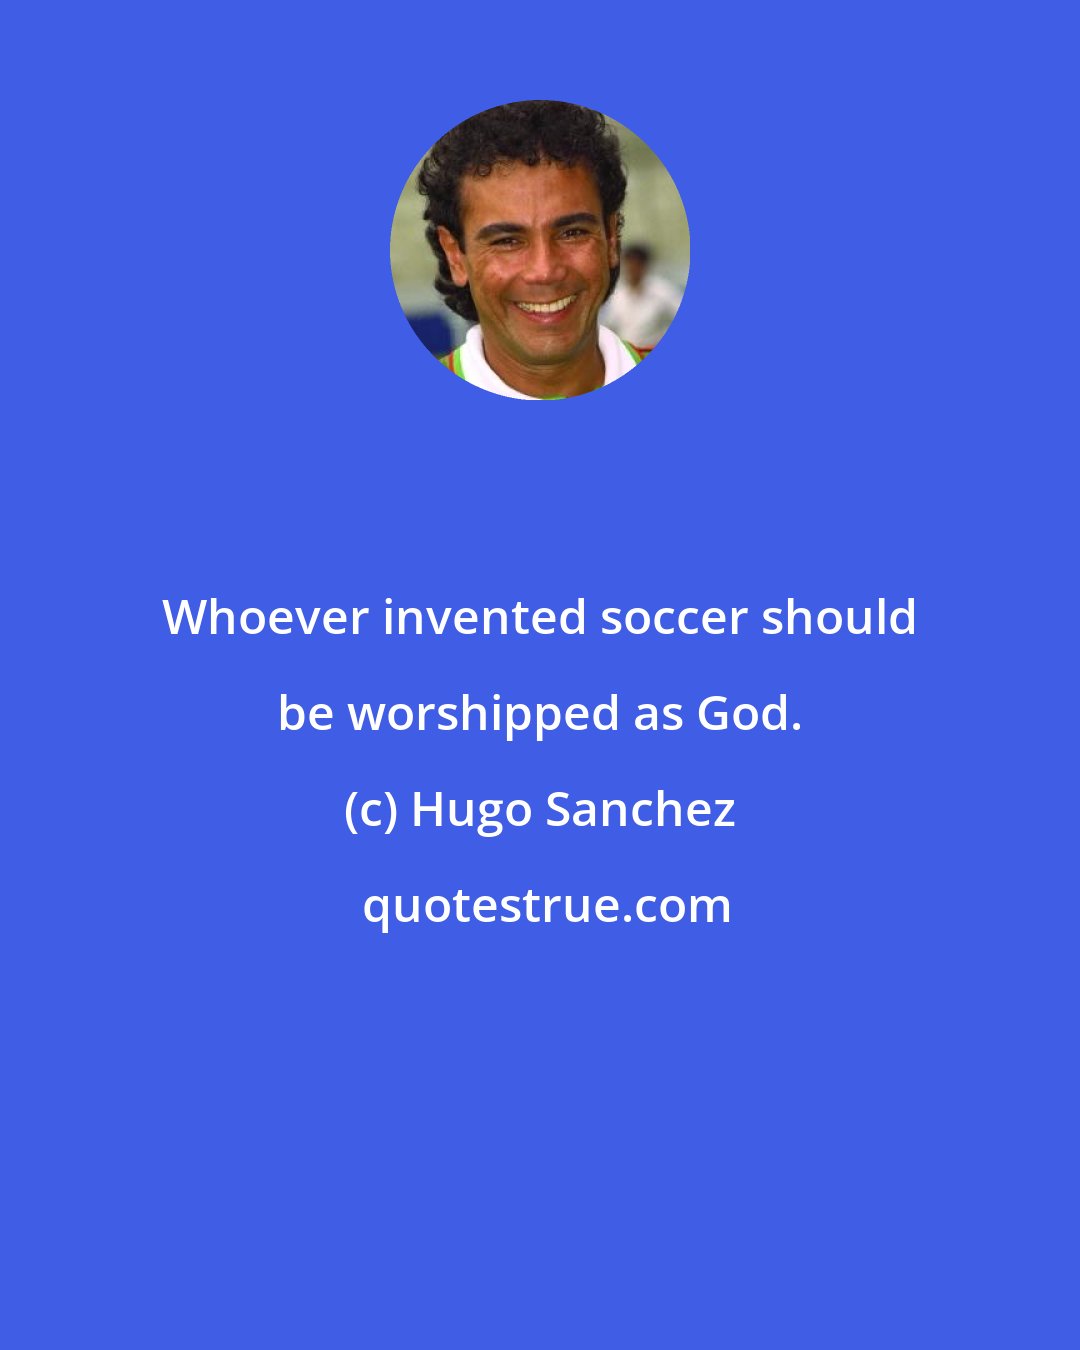 Hugo Sanchez: Whoever invented soccer should be worshipped as God.